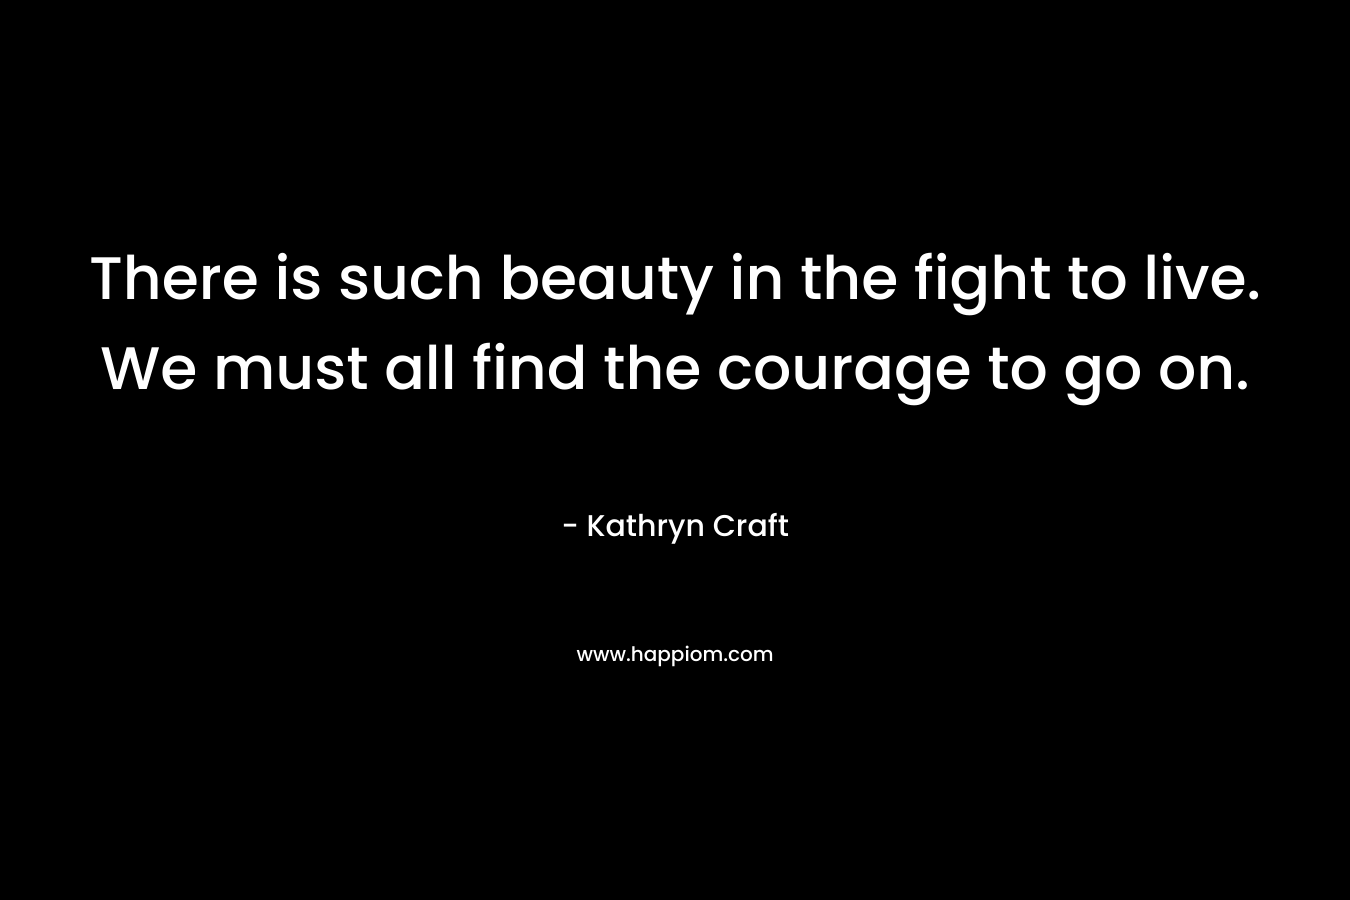 There is such beauty in the fight to live. We must all find the courage to go on. – Kathryn Craft